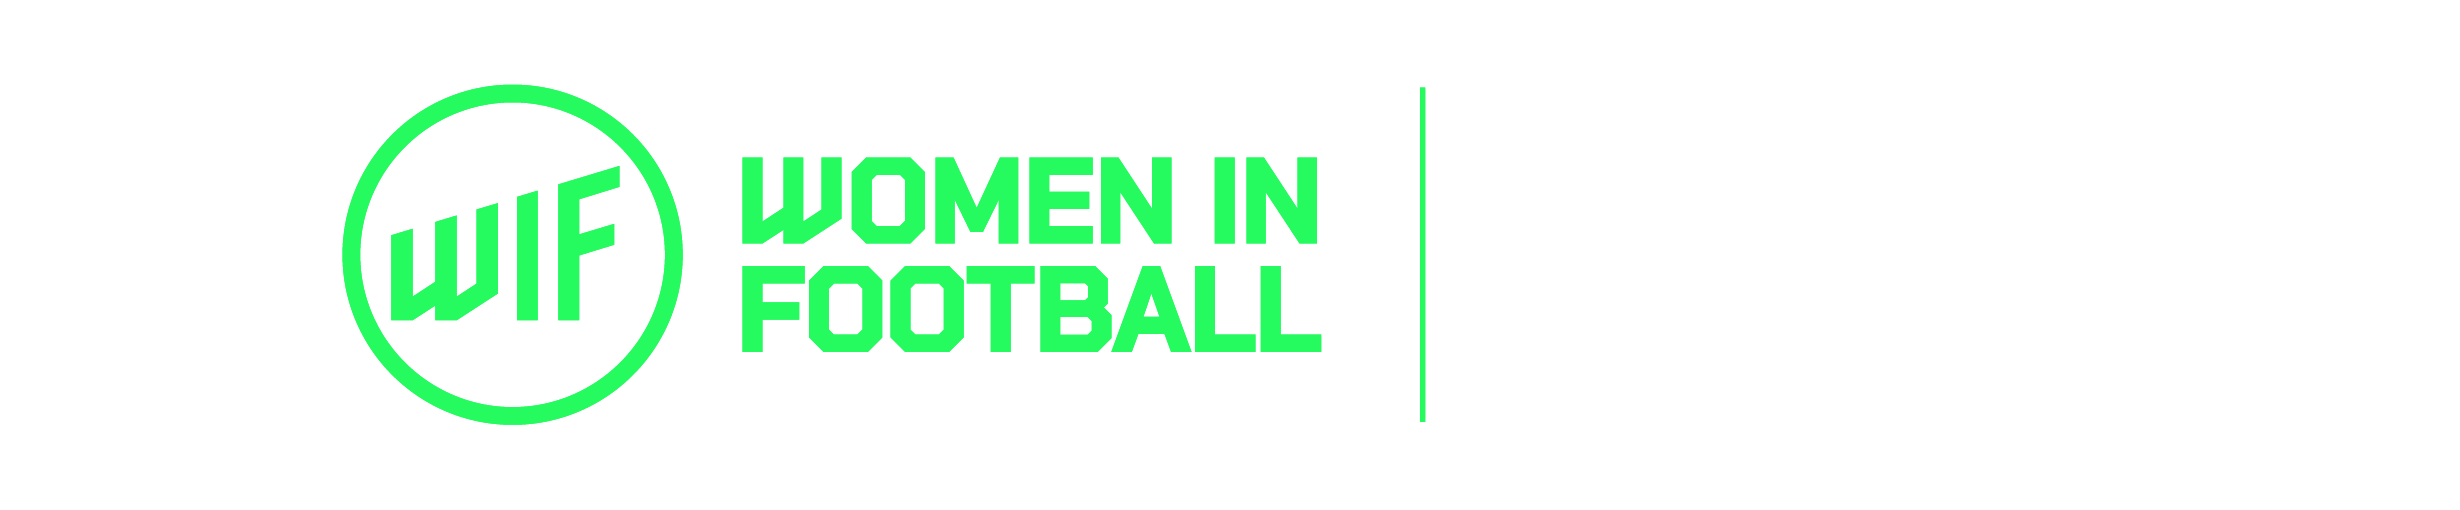 Women in Football. In partnership with Barclays